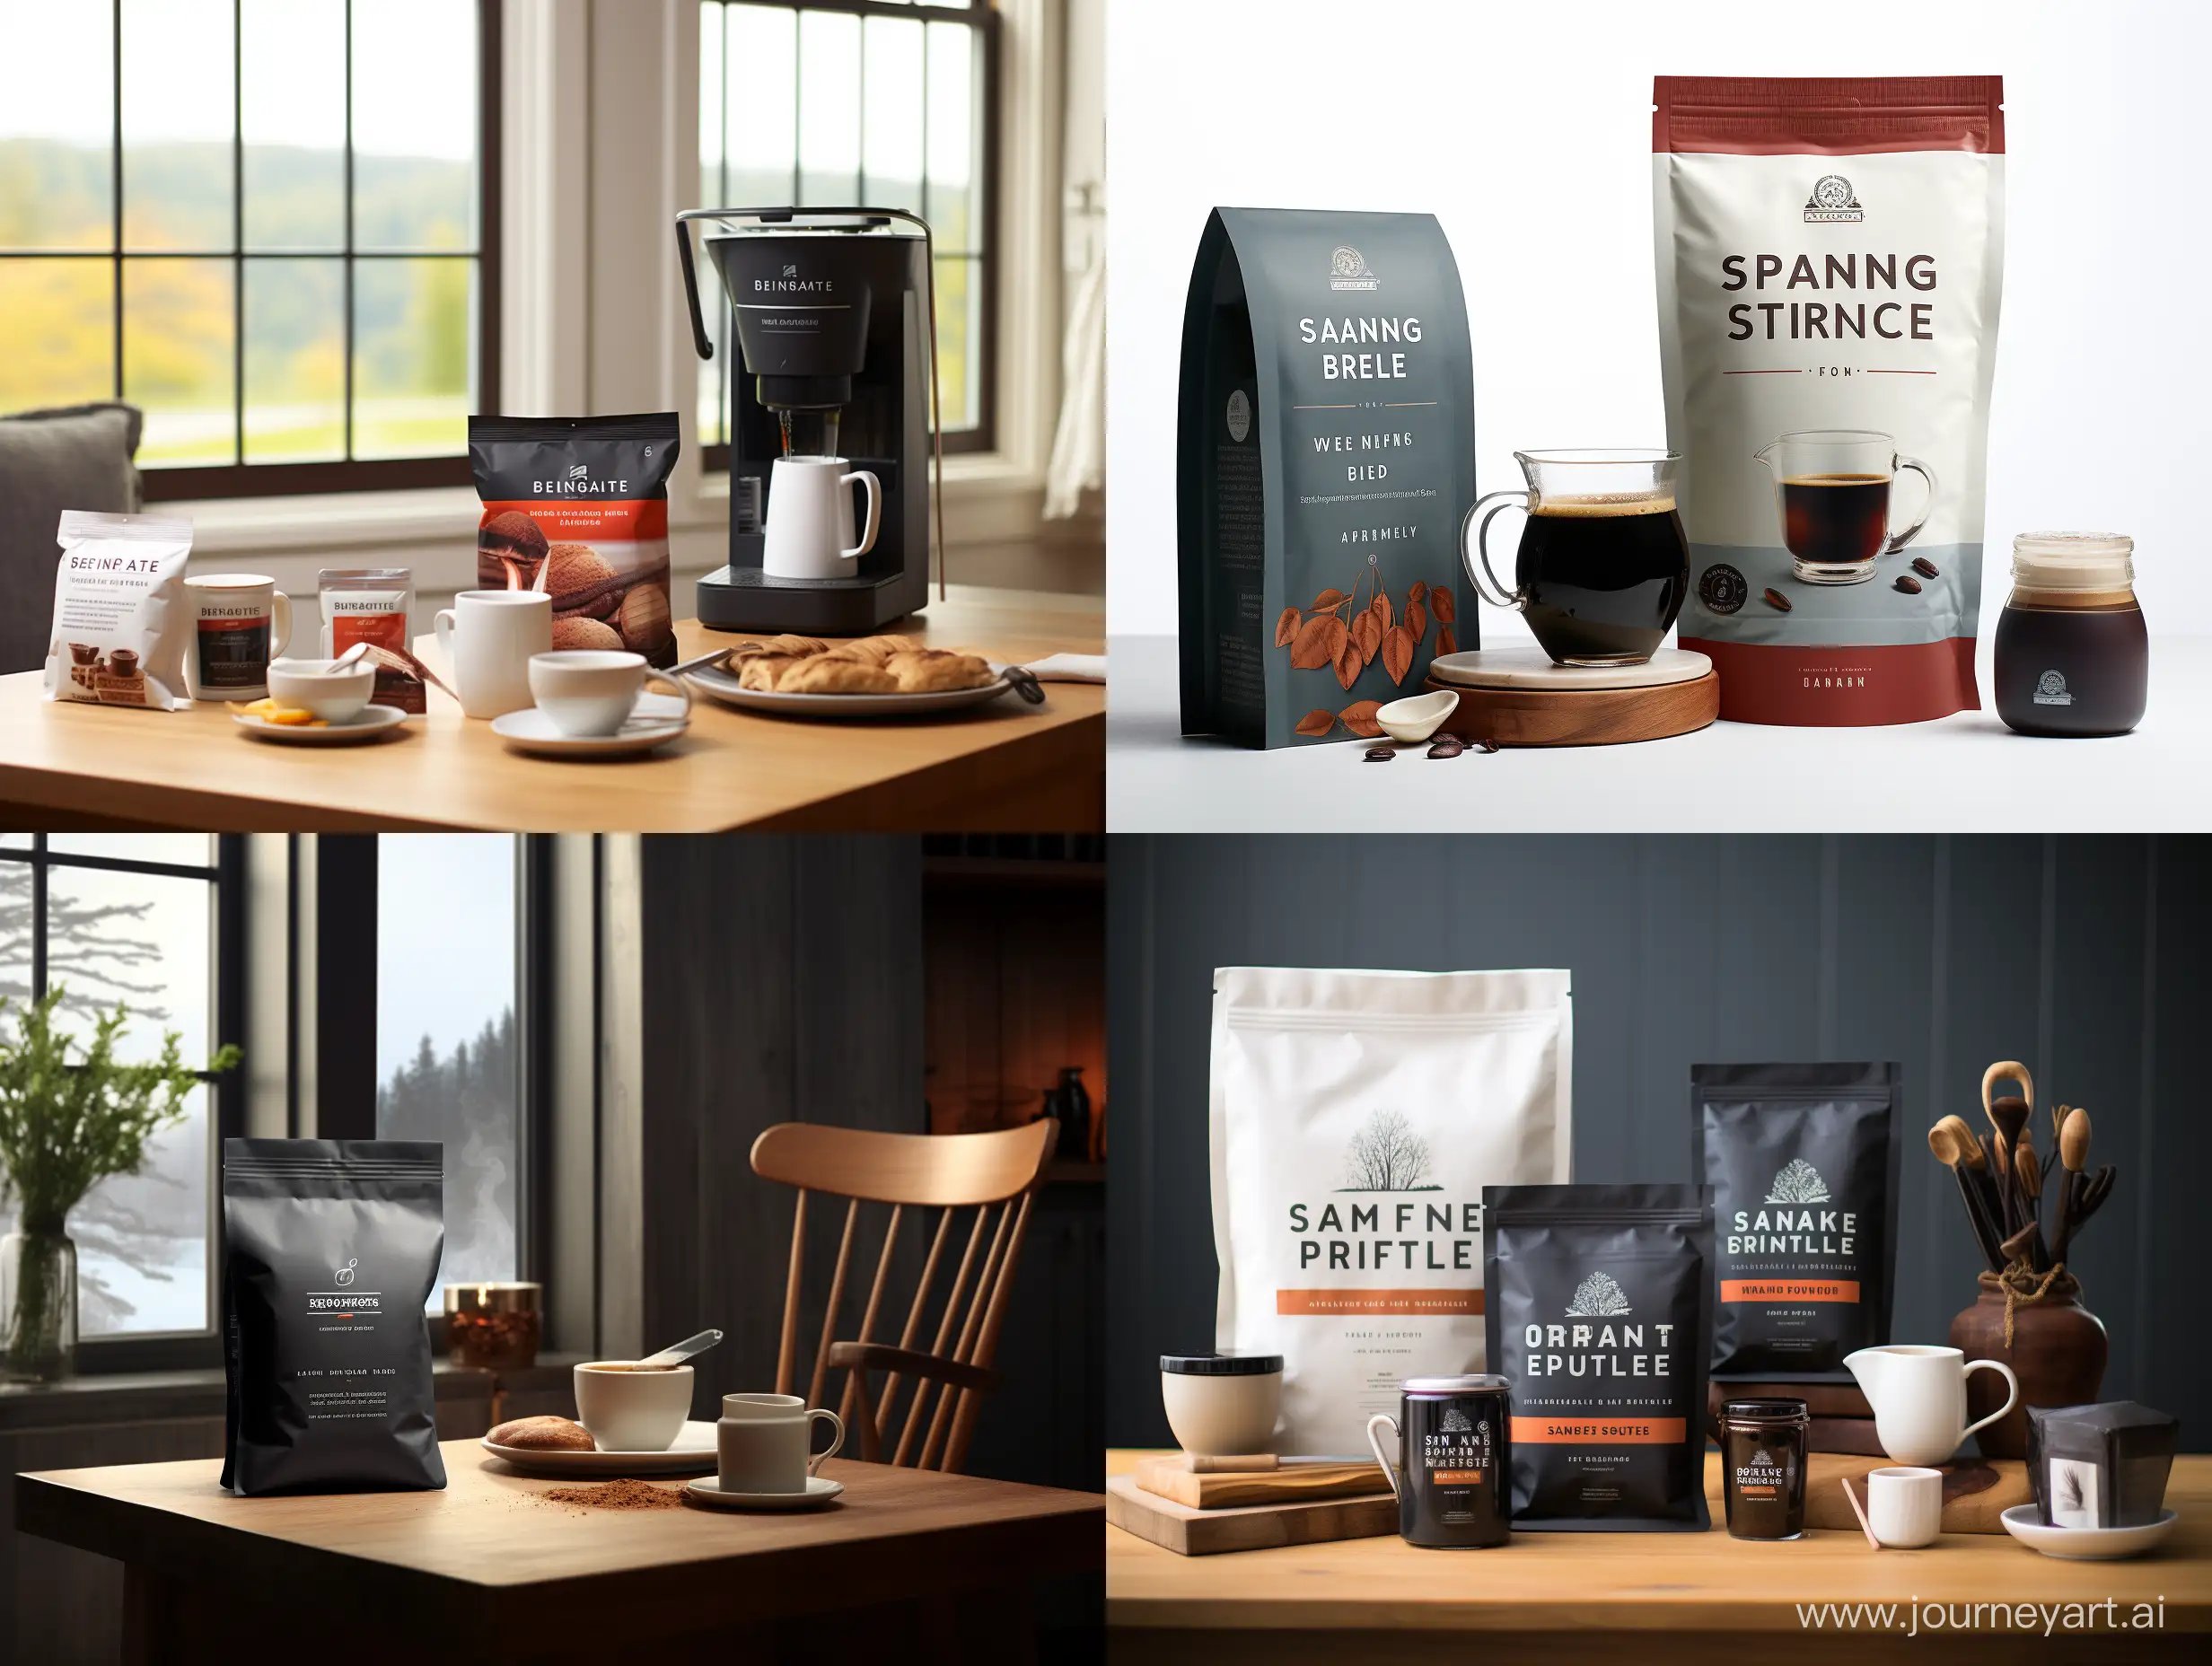 Create an inviting and warm image featuring a beginner-friendly coffee starter kit. Include a Bean Empire branded coffee bag, a simple brewing guide, and an assortment of mild coffee blends. The setting should be cozy, with a focus on the package that's approachable for coffee novices.